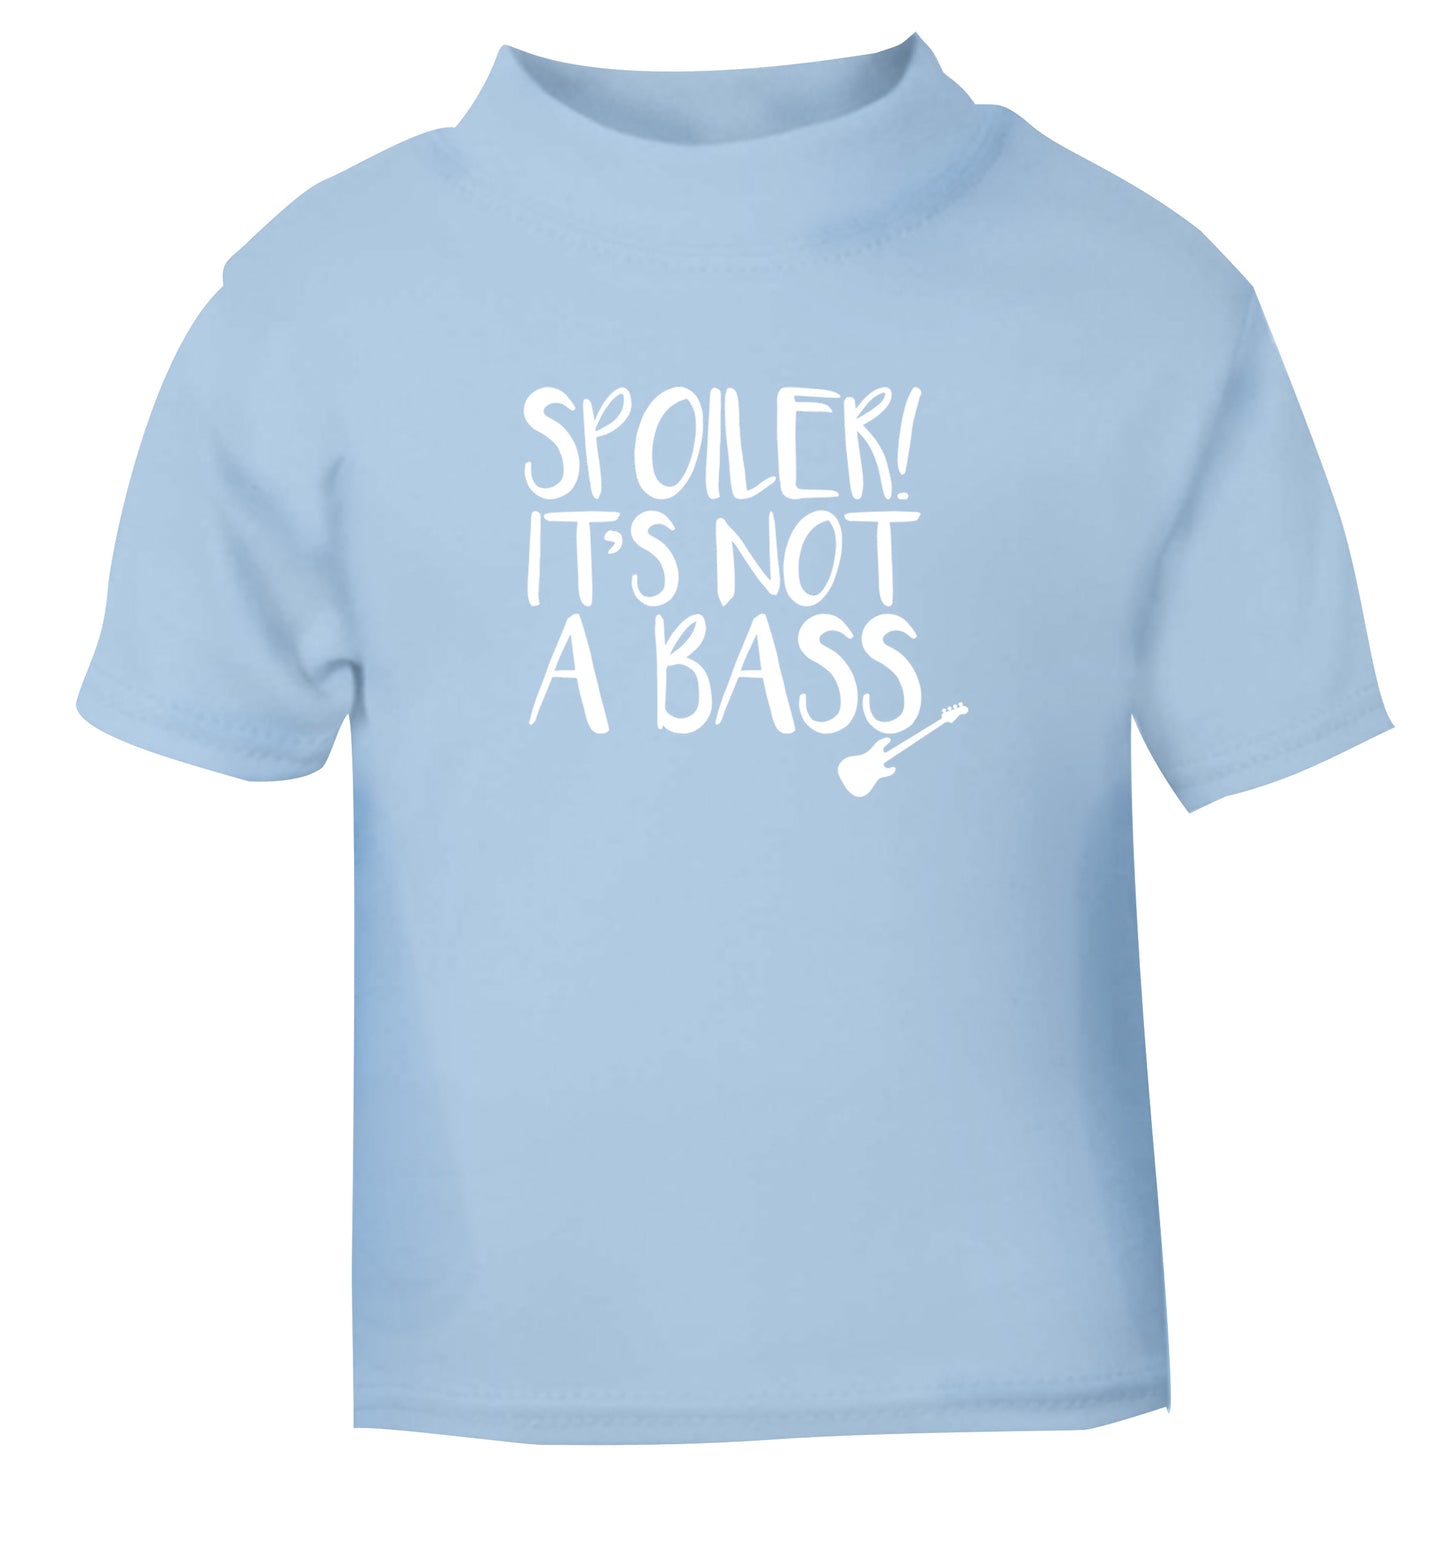 Spoiler it's not a bass light blue Baby Toddler Tshirt 2 Years